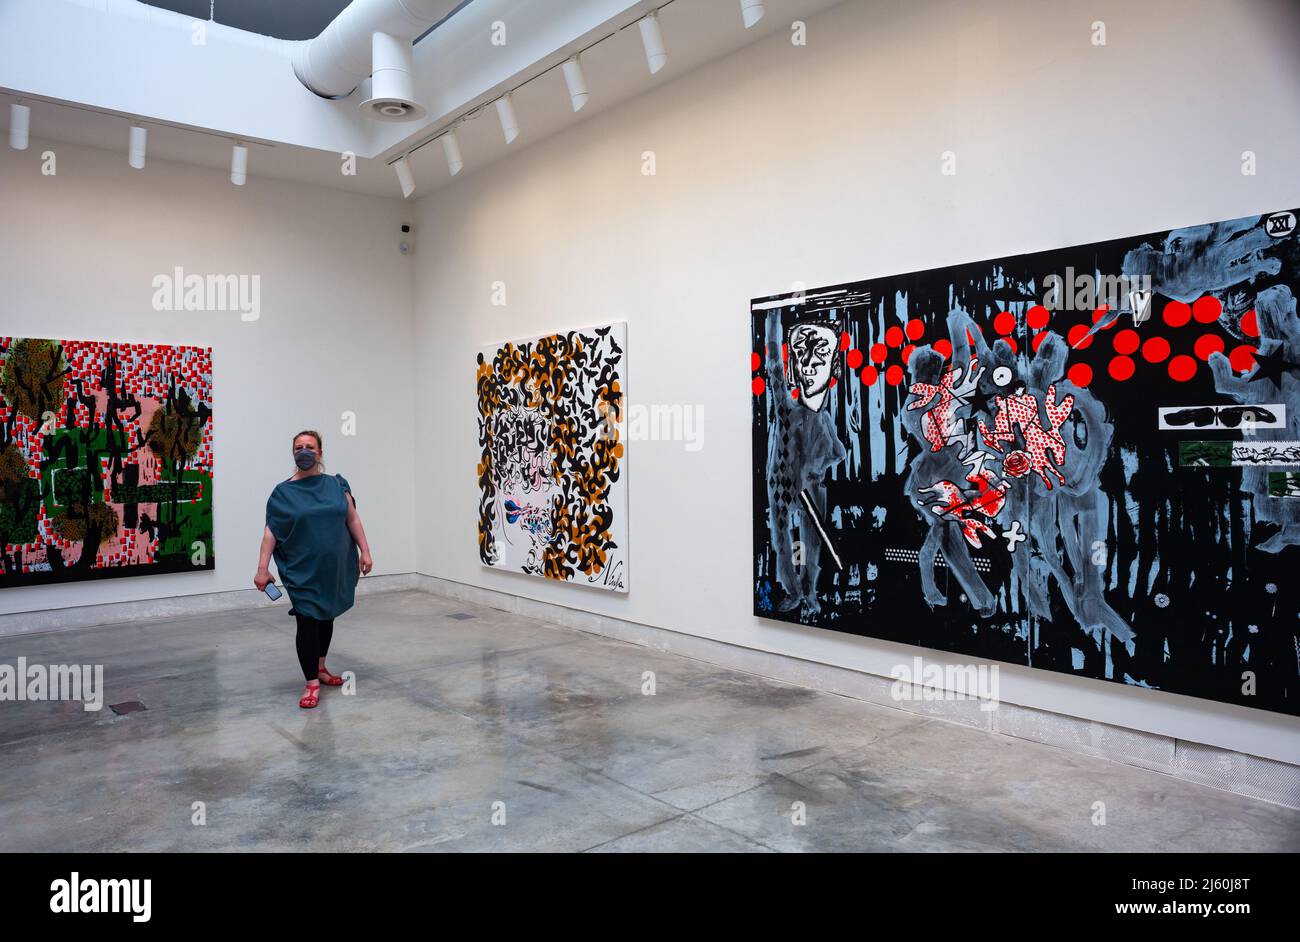 VENICE, ITALY - April 20: Painting of Charline von Heyl at the 59th International Art exhibition of Venice biennale on April 20, 2022 Stock Photo